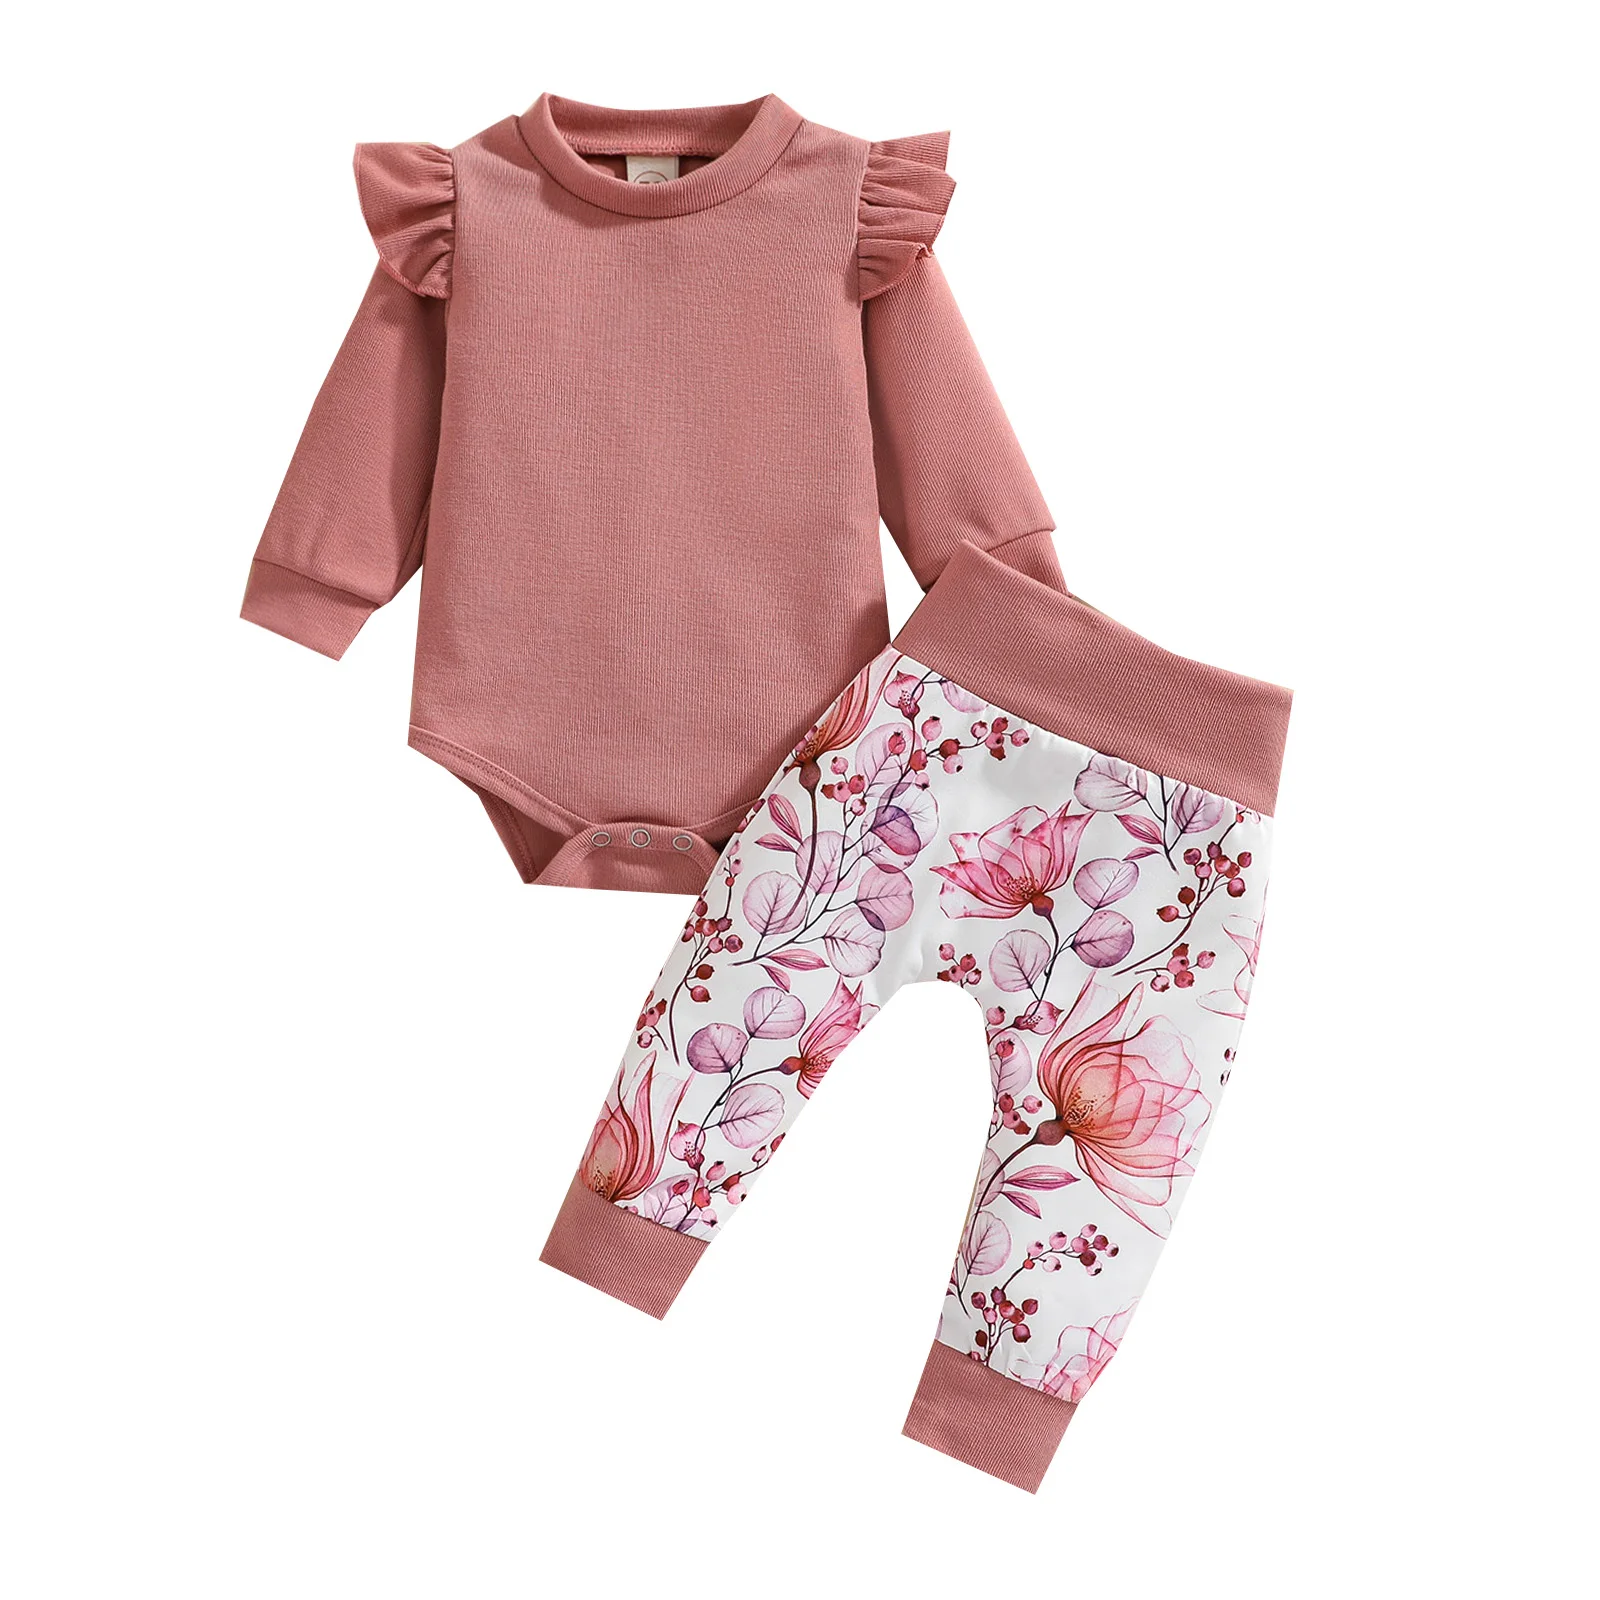 0-24M Baby Girls Solid Long Sleeve Rompers+Floral Printed Pants 2Pcs Outfits Set 